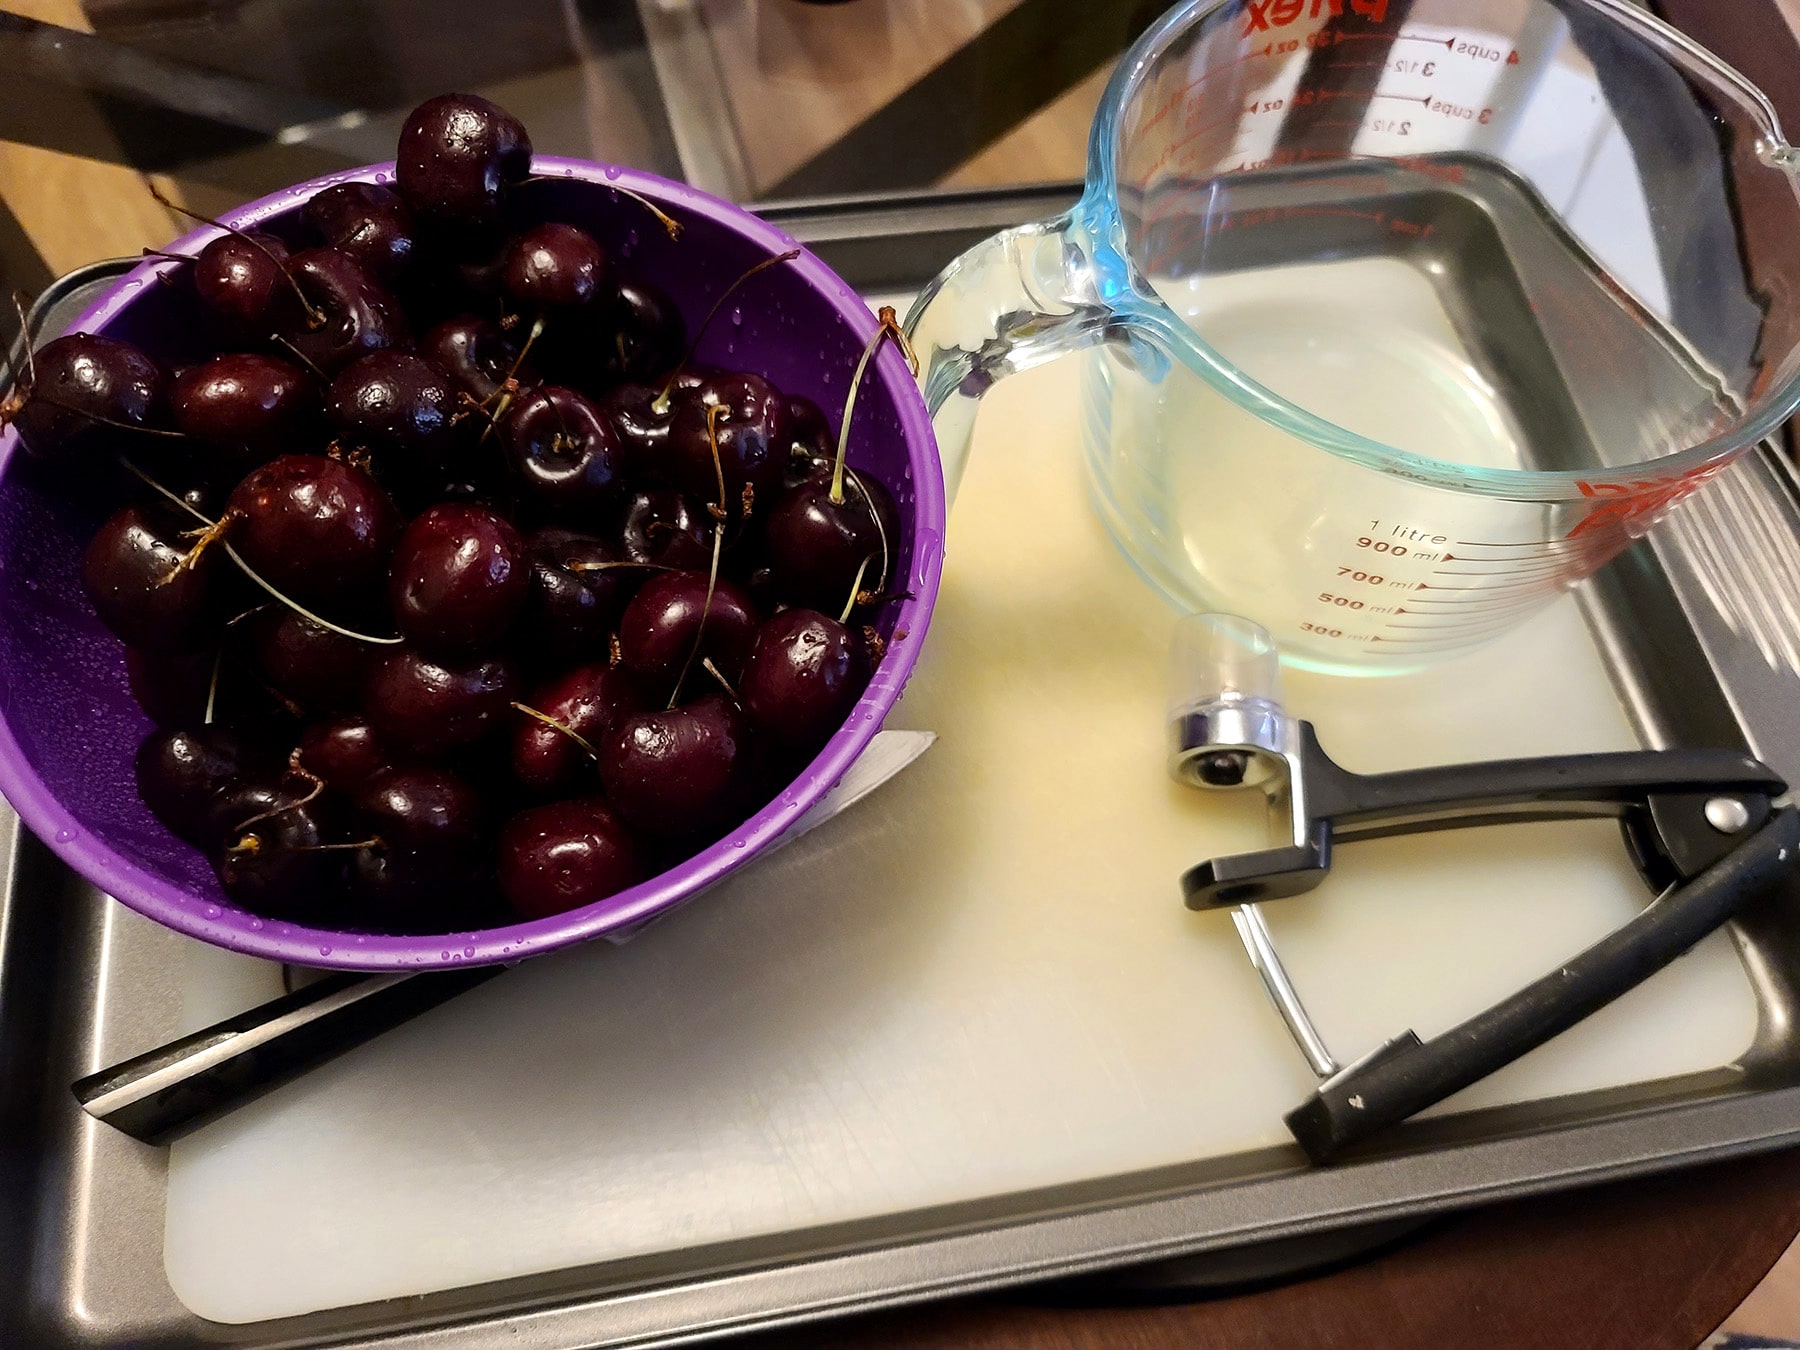 A bowl of cherries on a baking pan, along with a cherry pitter and a measuring cup.